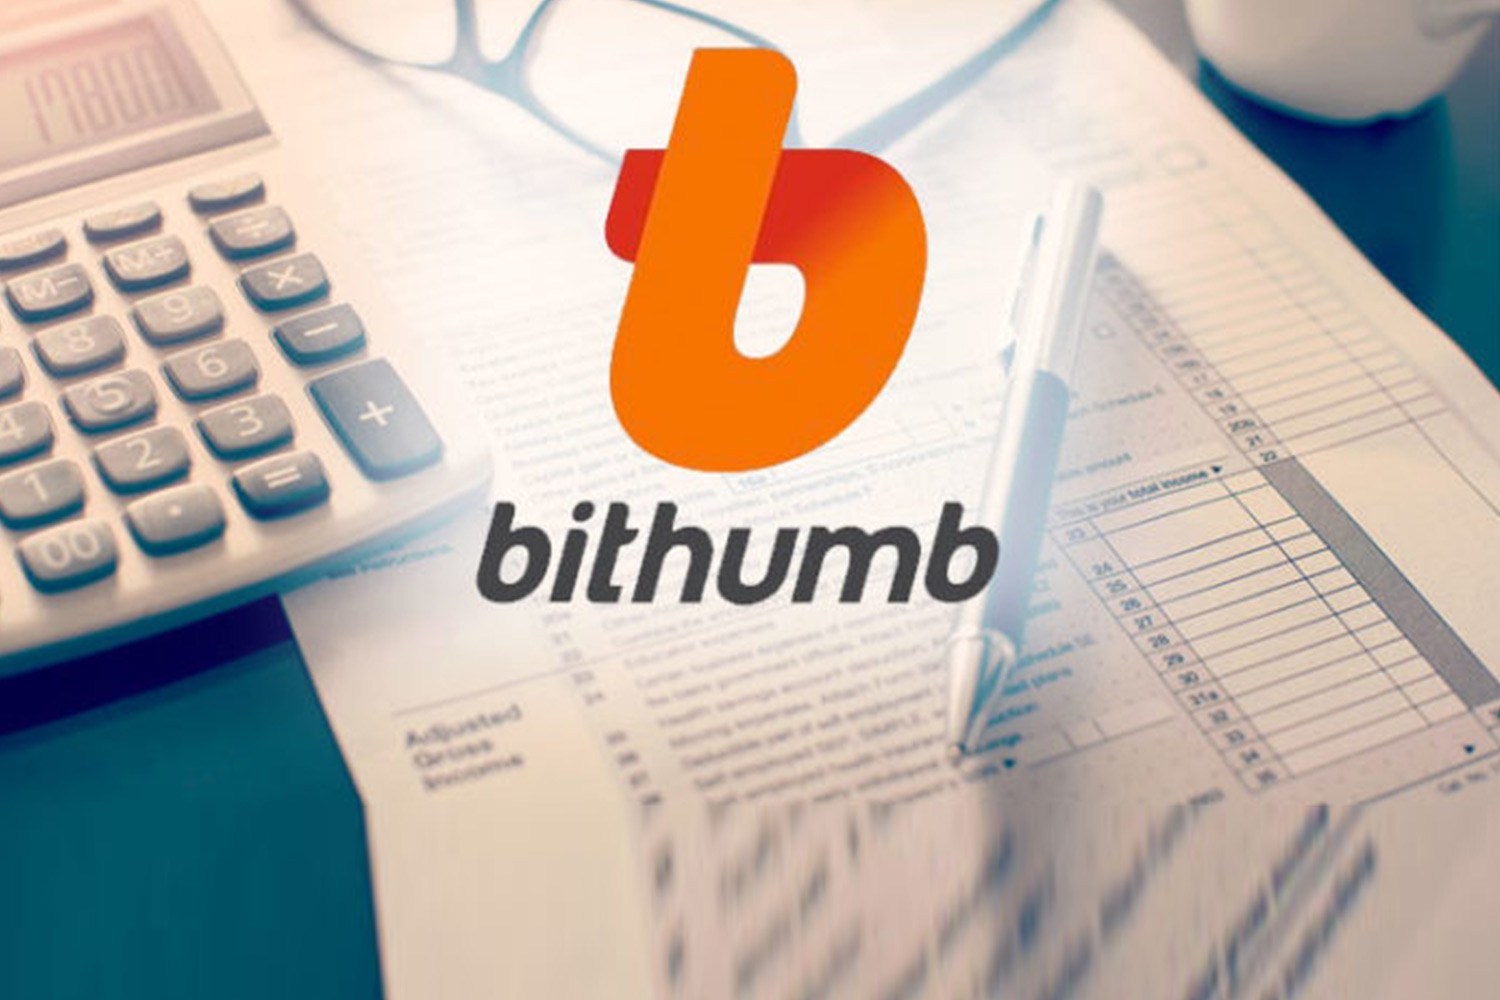 Former Bithumb Chairman Found Not Guilty In First Trial